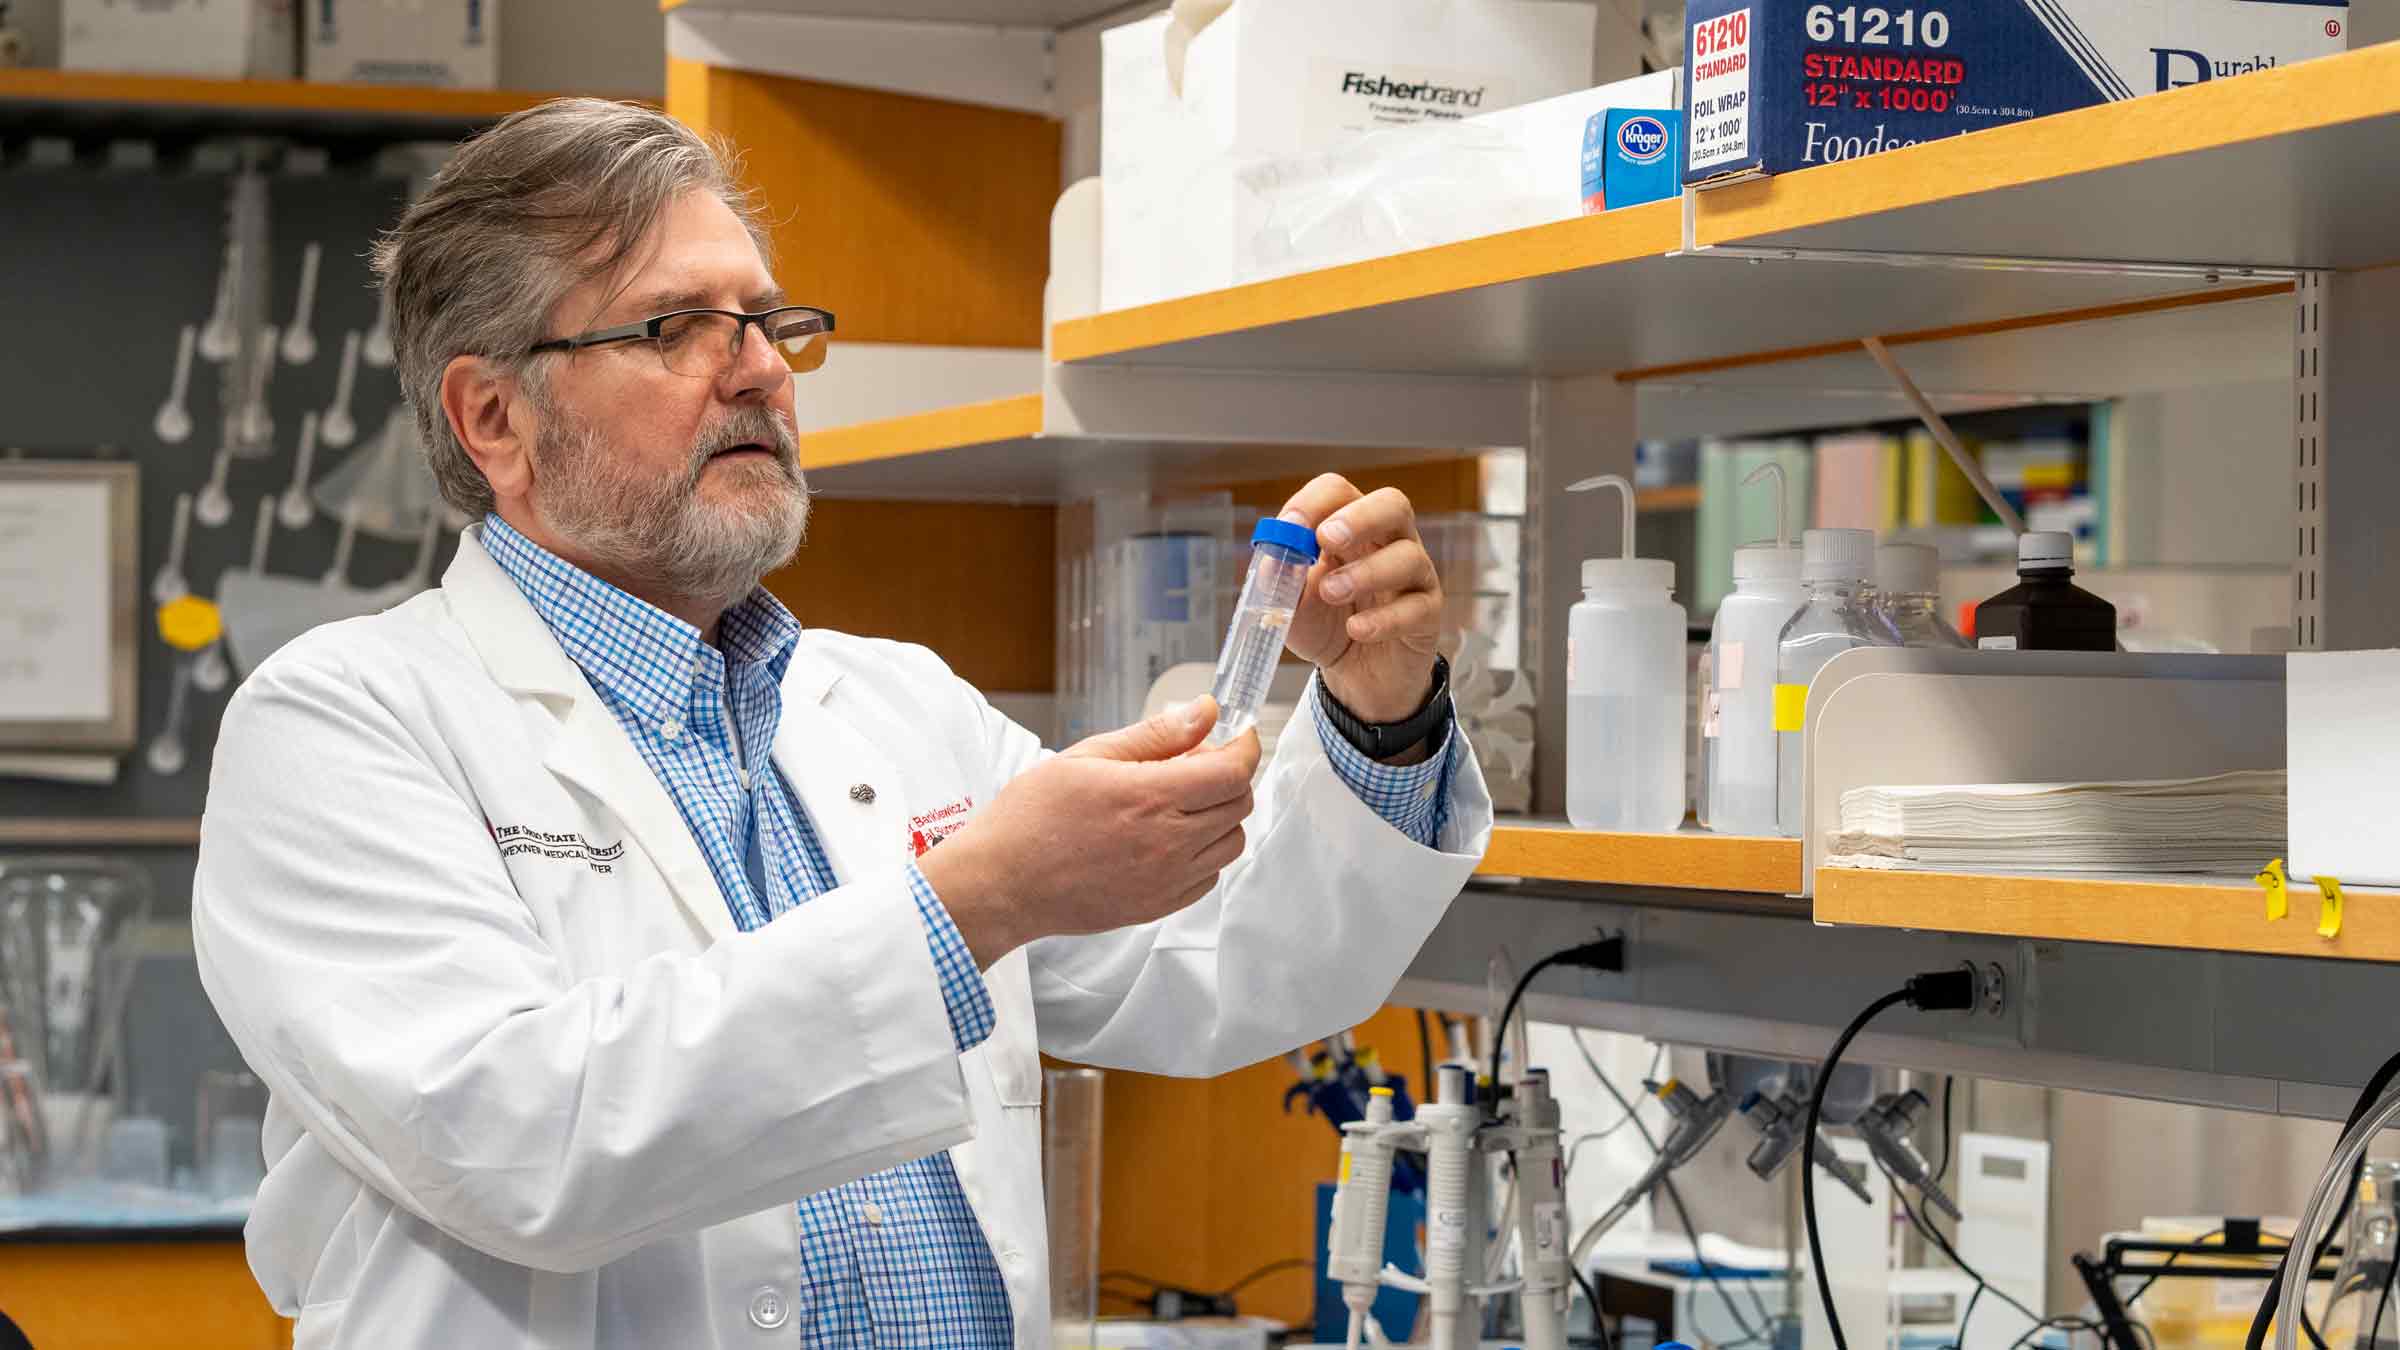 Inspired by personal experiences, philanthropic giving fuels gene therapy at Ohio State